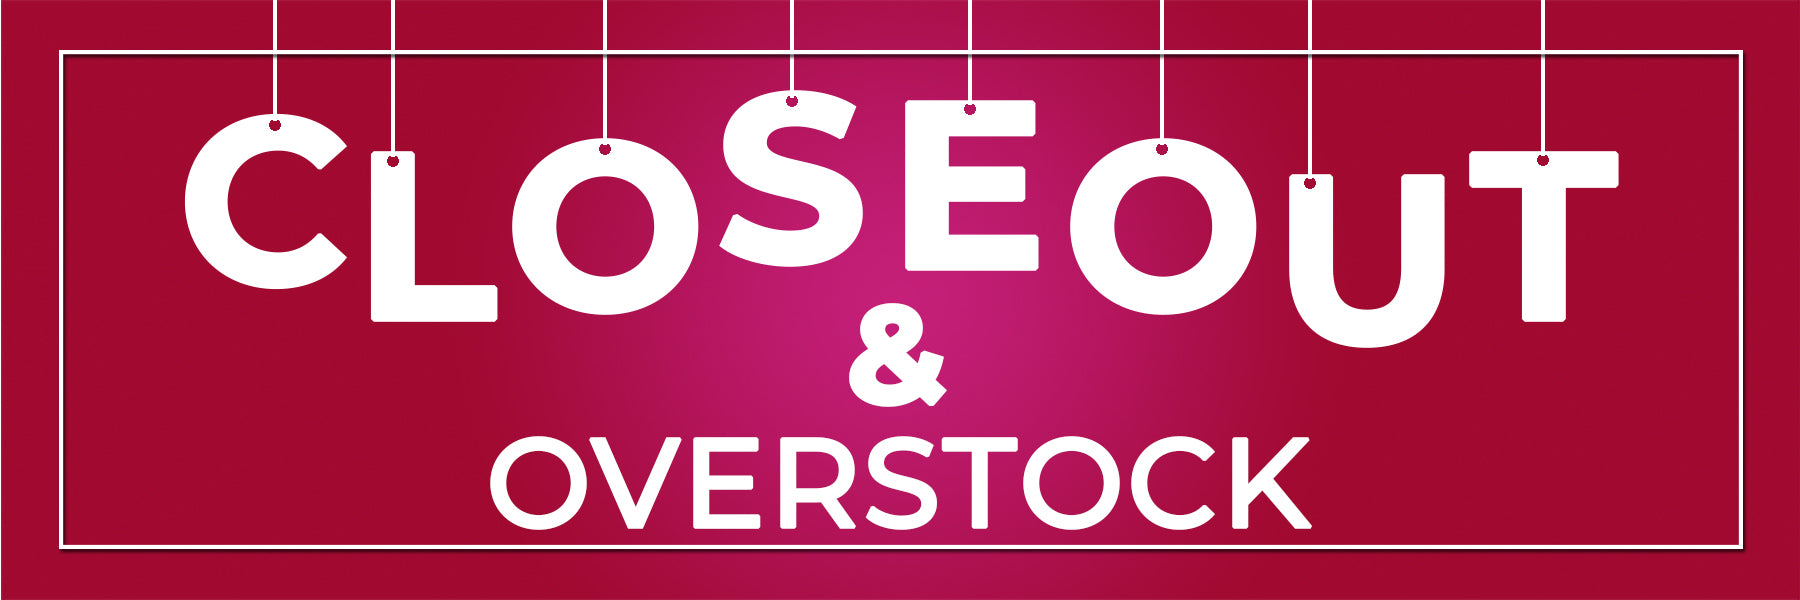 Closeout & Overstock Specials